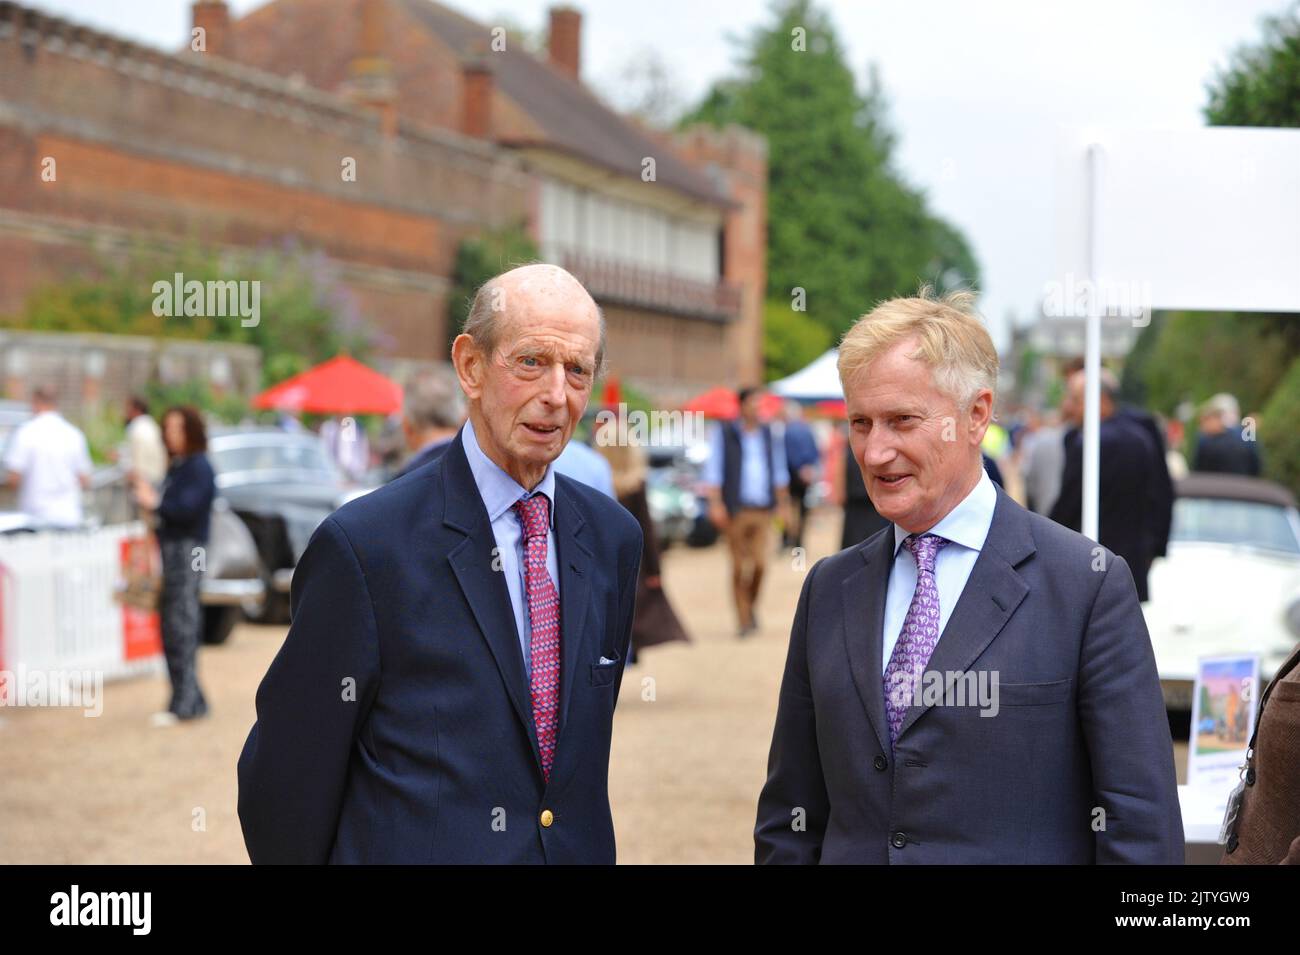 His Royal Highness the Duke of Kent being shown around the 2022 Concours of Elegance by James Brooks-Ward, (Managing Director, Thorough Events) which is taking place in the grounds of Hampton Court Palace, London, UK. The Concours of Elegance brings together a selection of 80 of the rarest cars from around the world - many of which will never have been seen before in the UK. Complementing the Concours of Elegance will be displays of other fine motor cars, including entrants to The Club Trophy. Credit: Michael Preston/Alamy Live News Stock Photo